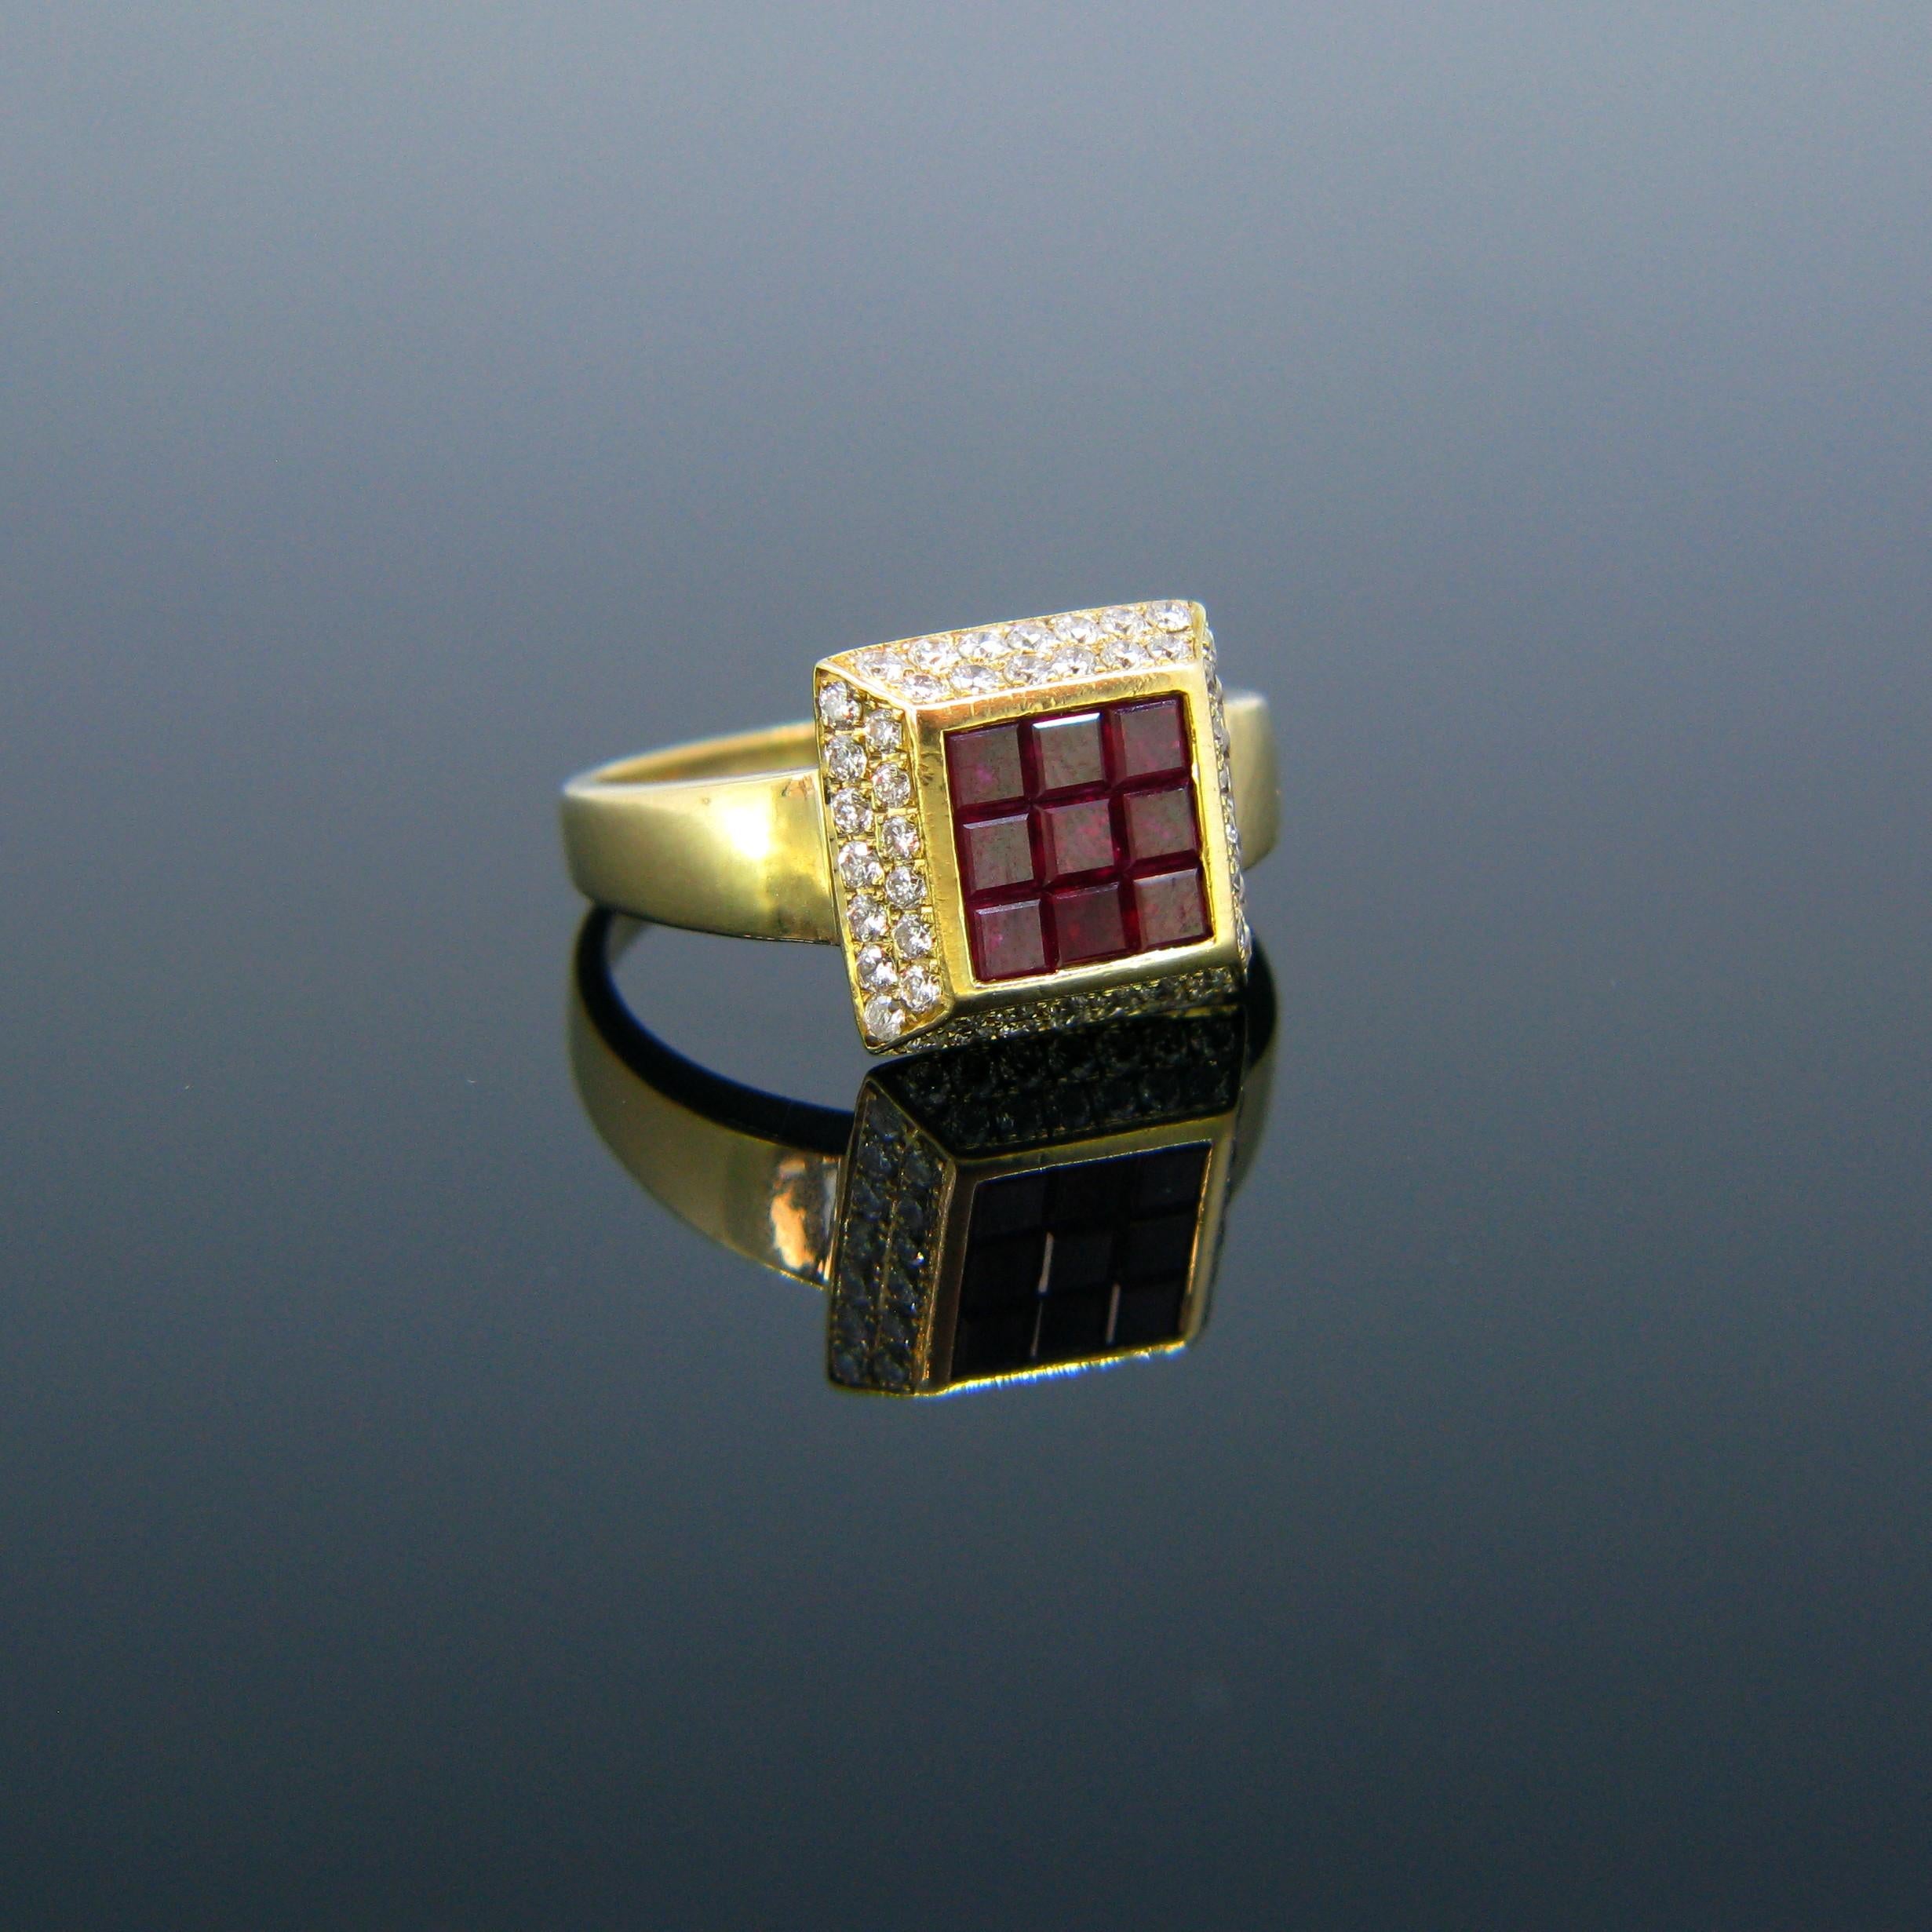 This square shaped ring is fully made in 18kt yellow gold. It is set with 9 calibre rubies; we think they are Burmese no heat. The total ruby carat weight is around 2ct. It is also with 53 round brilliant cut diamonds around the rubies. The ring